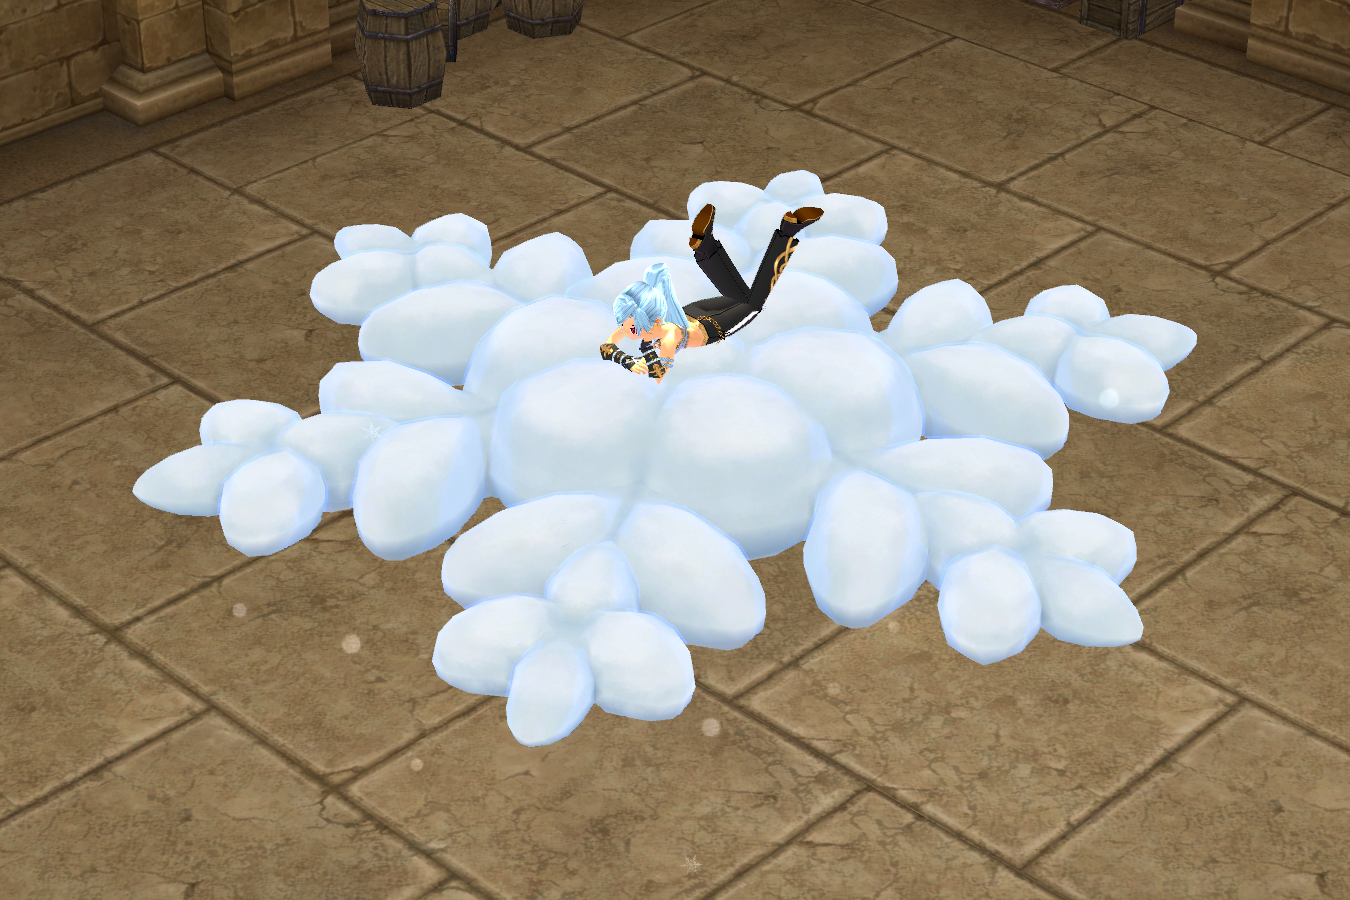 Seated preview of Snow Cloud Bed